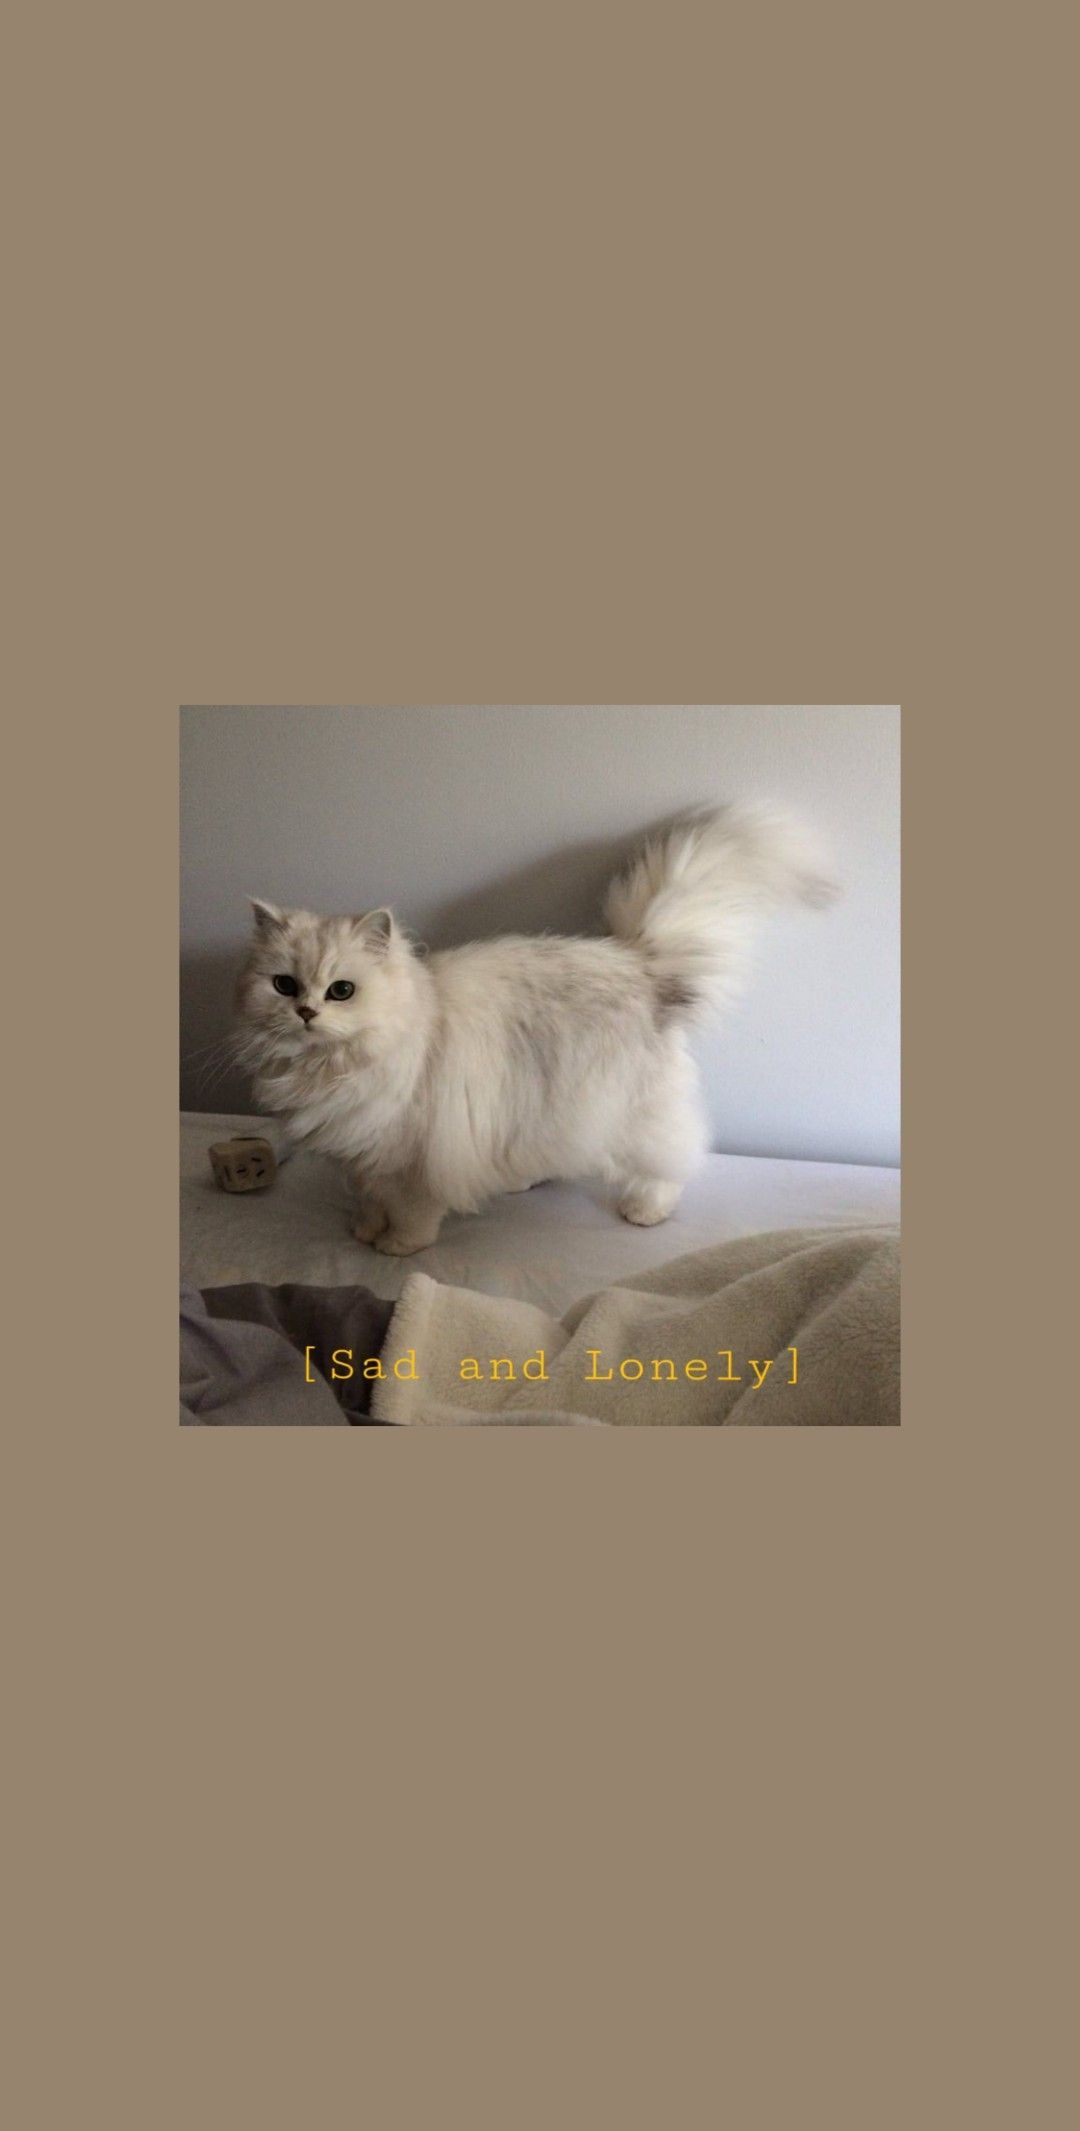 A white cat standing on a bed - Cat